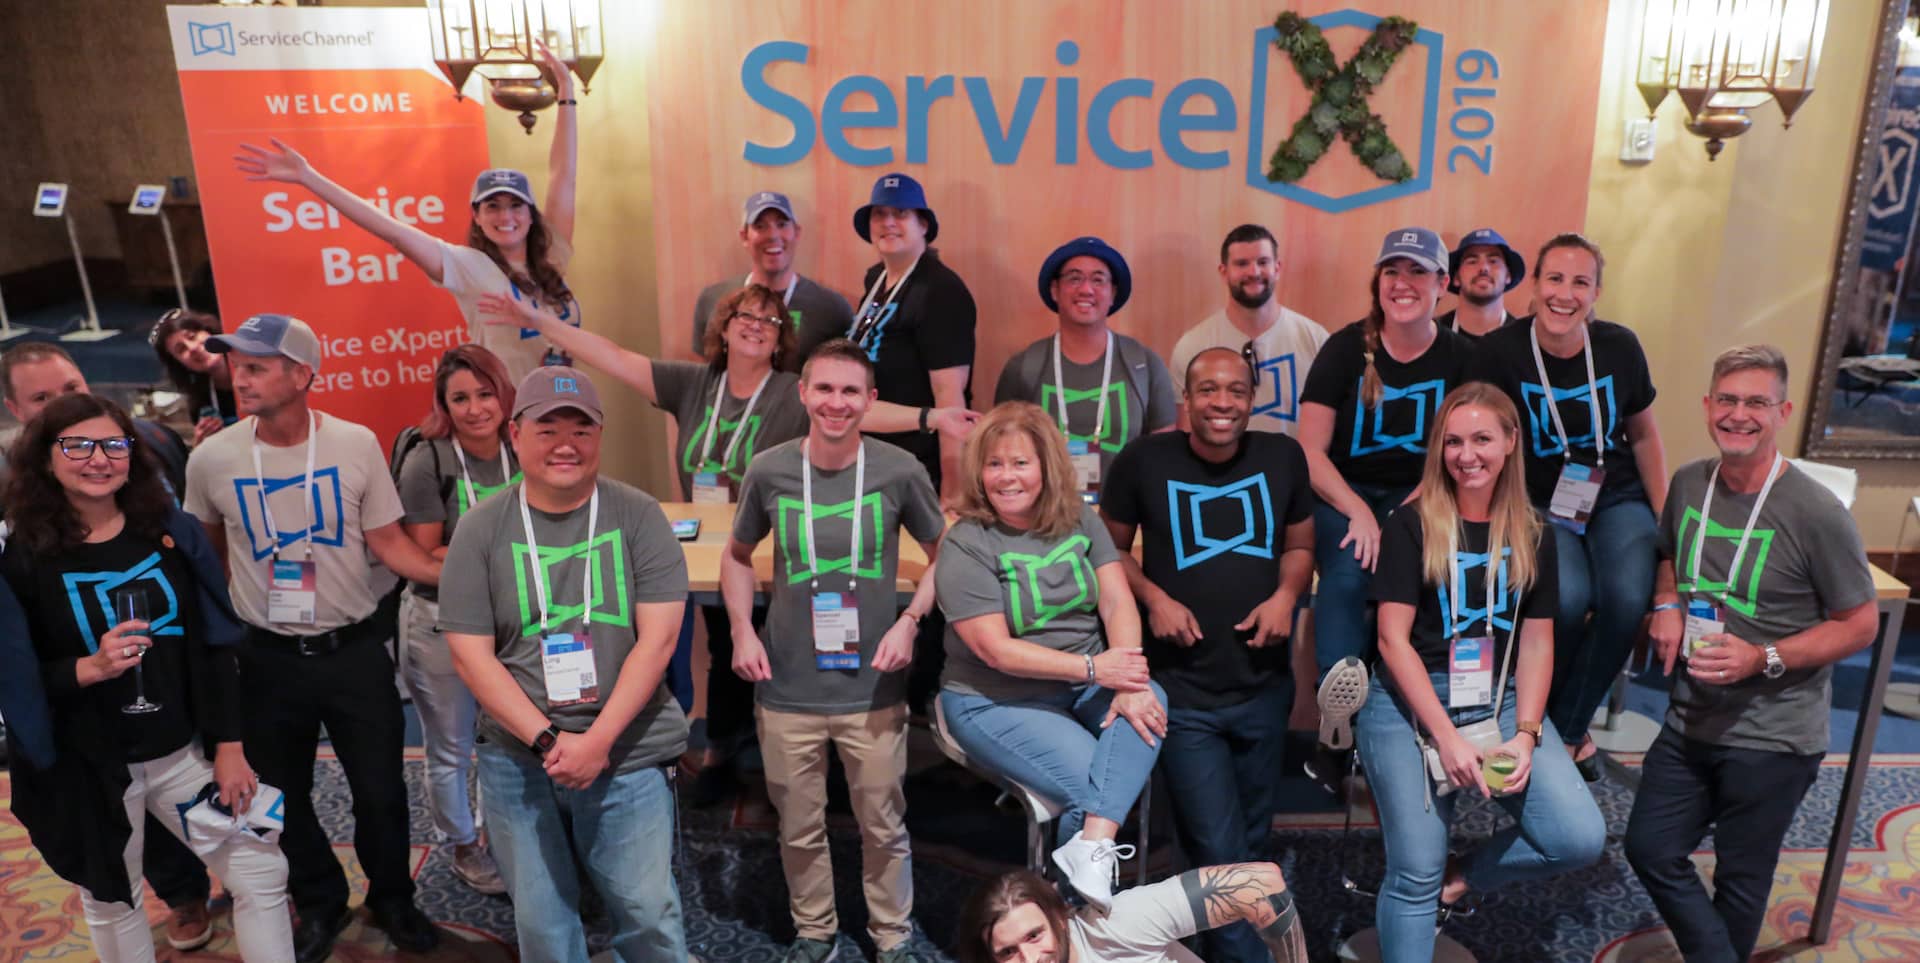 group picture of servicechannel employees